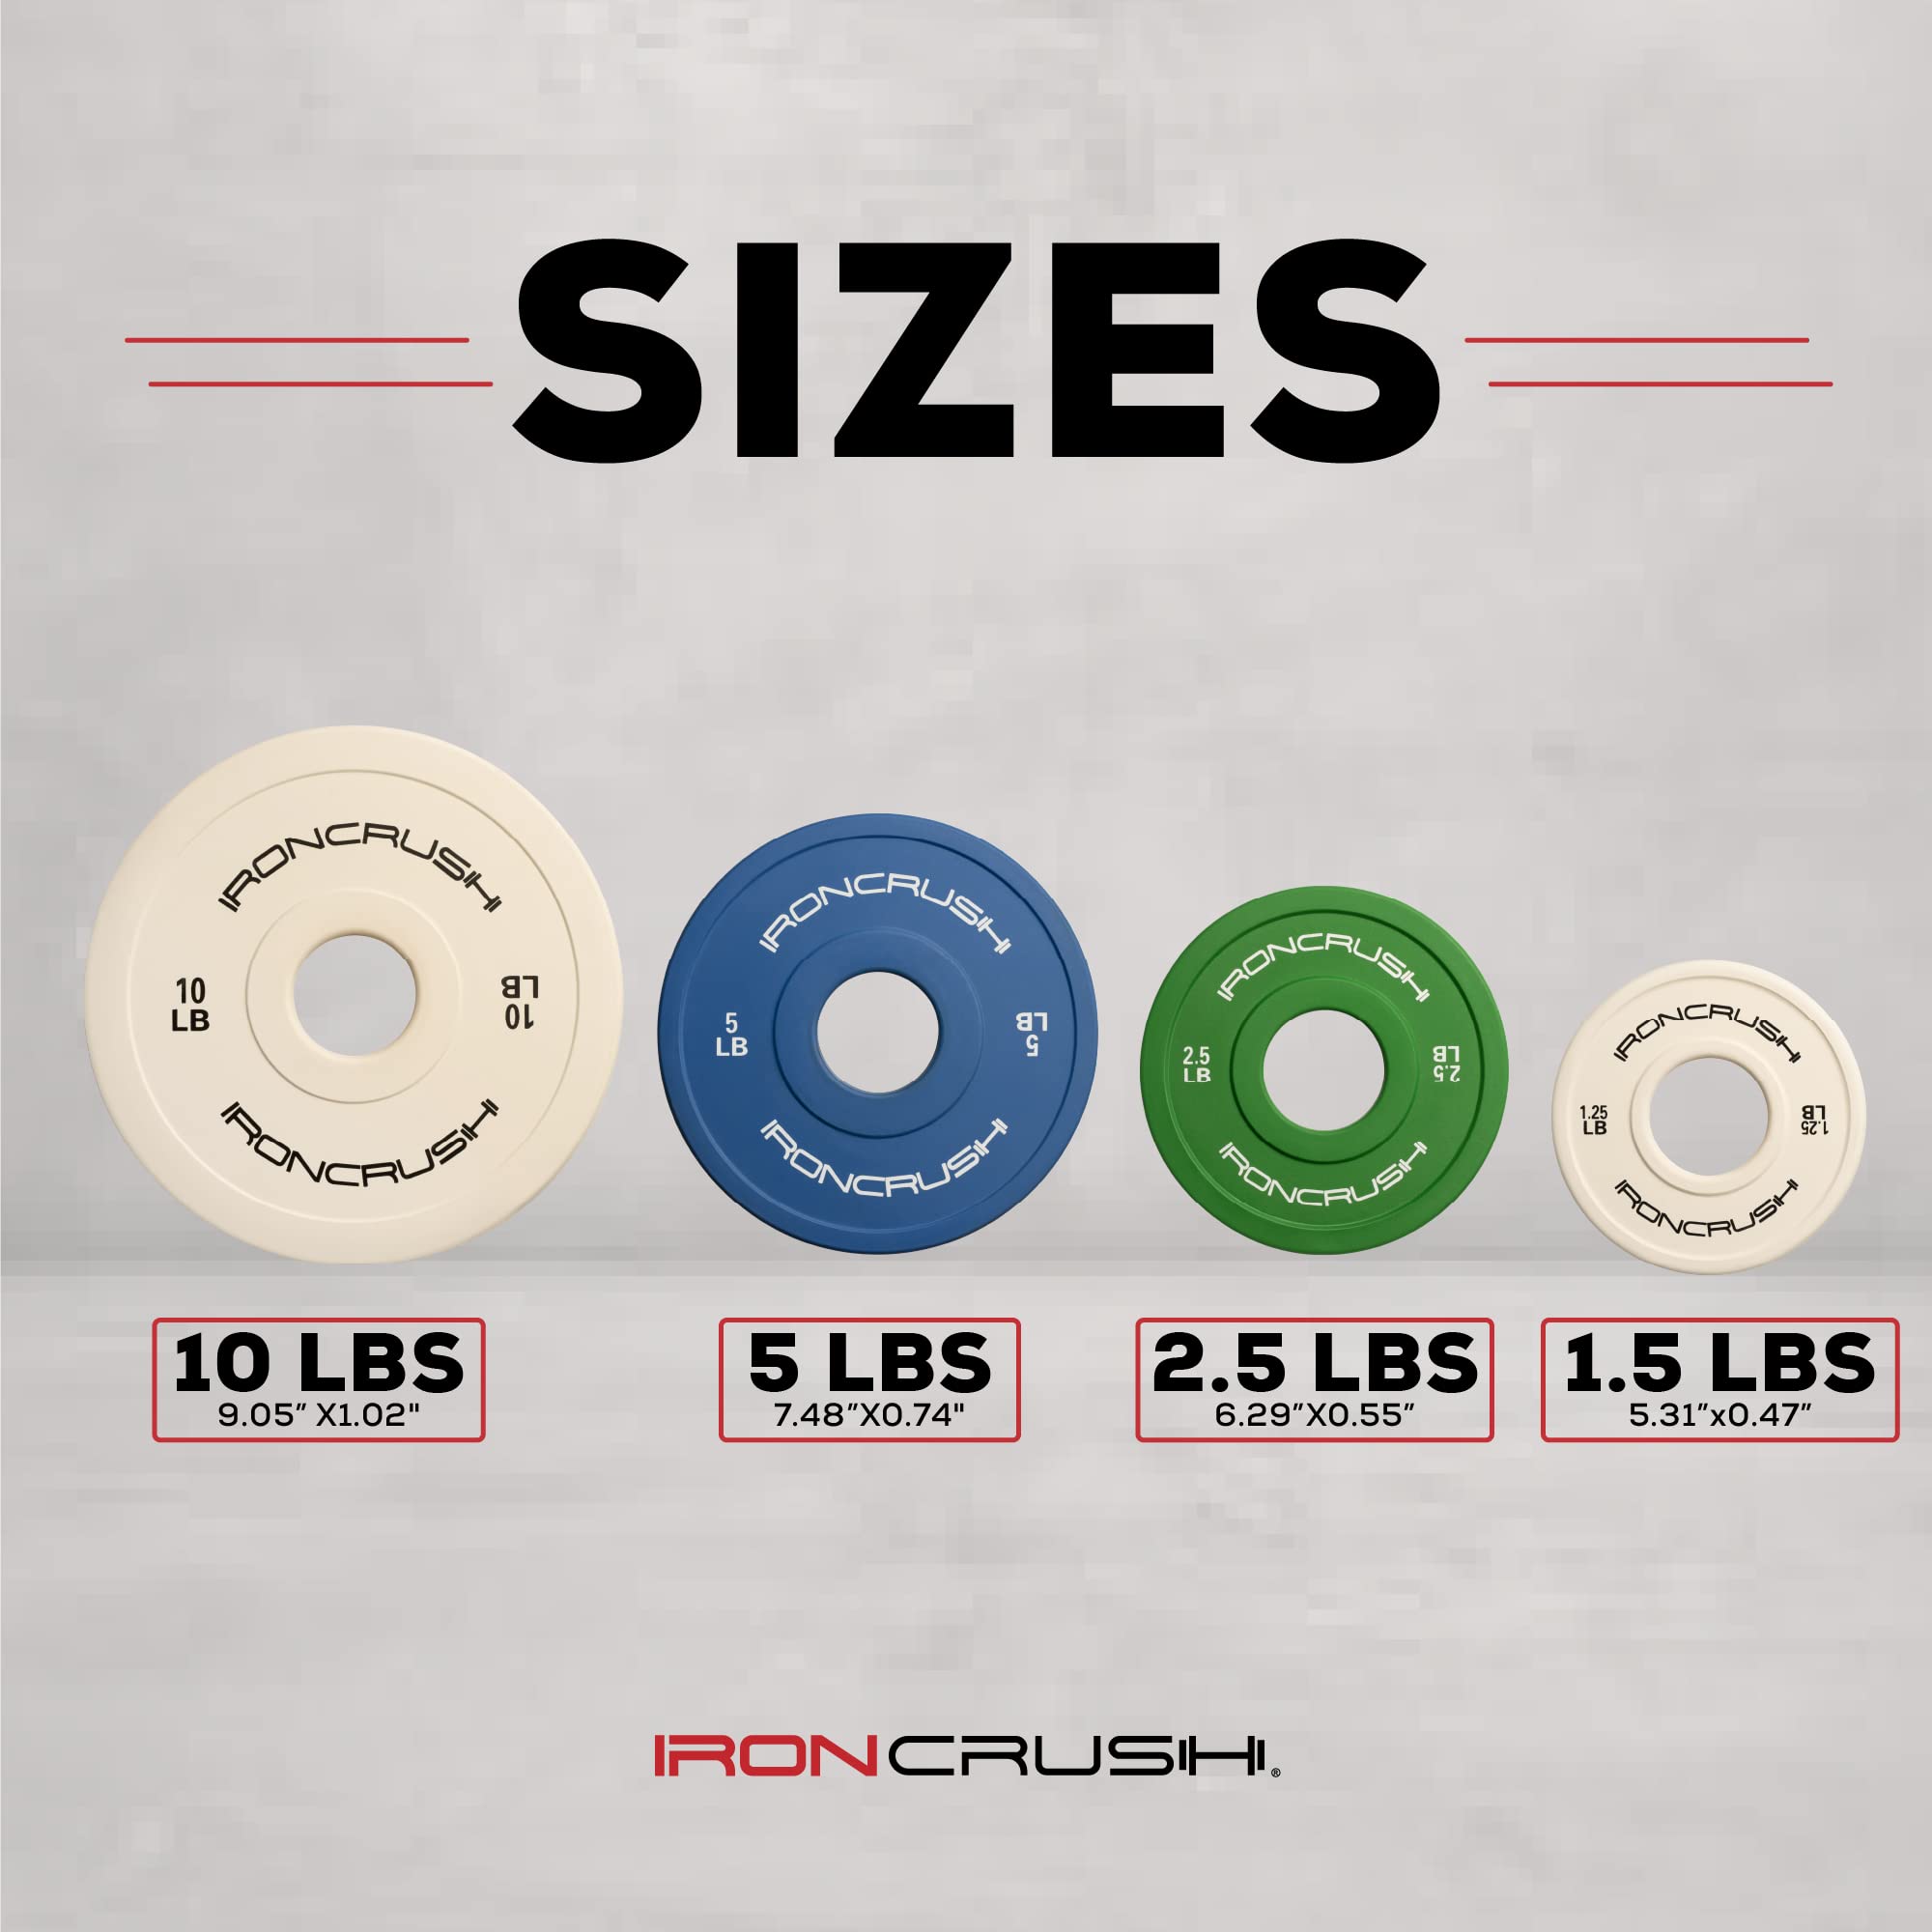 Iron Crush Fractional Change Plates for Olympic Weights, Strength Training, and CrossFit Bumper Plates - From 1.25lb to 10lb Weights, Rubber Coated for Olympic Barbells